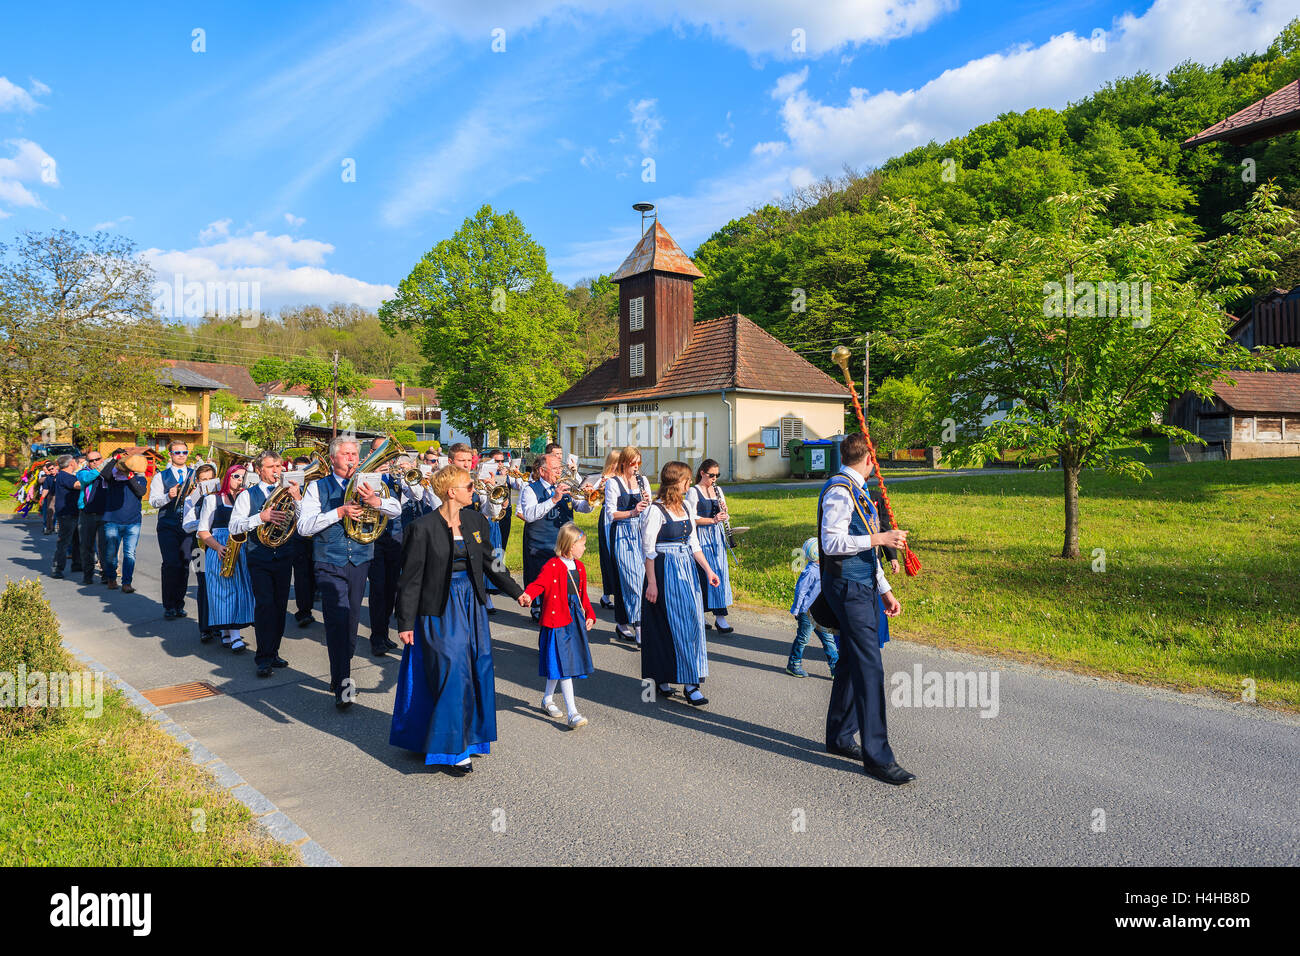 GLASING VILLAGE, AUSTRIA - APR 30, 2016: music band people walking in a parade on street during May Tree celebration. In Germany Stock Photo